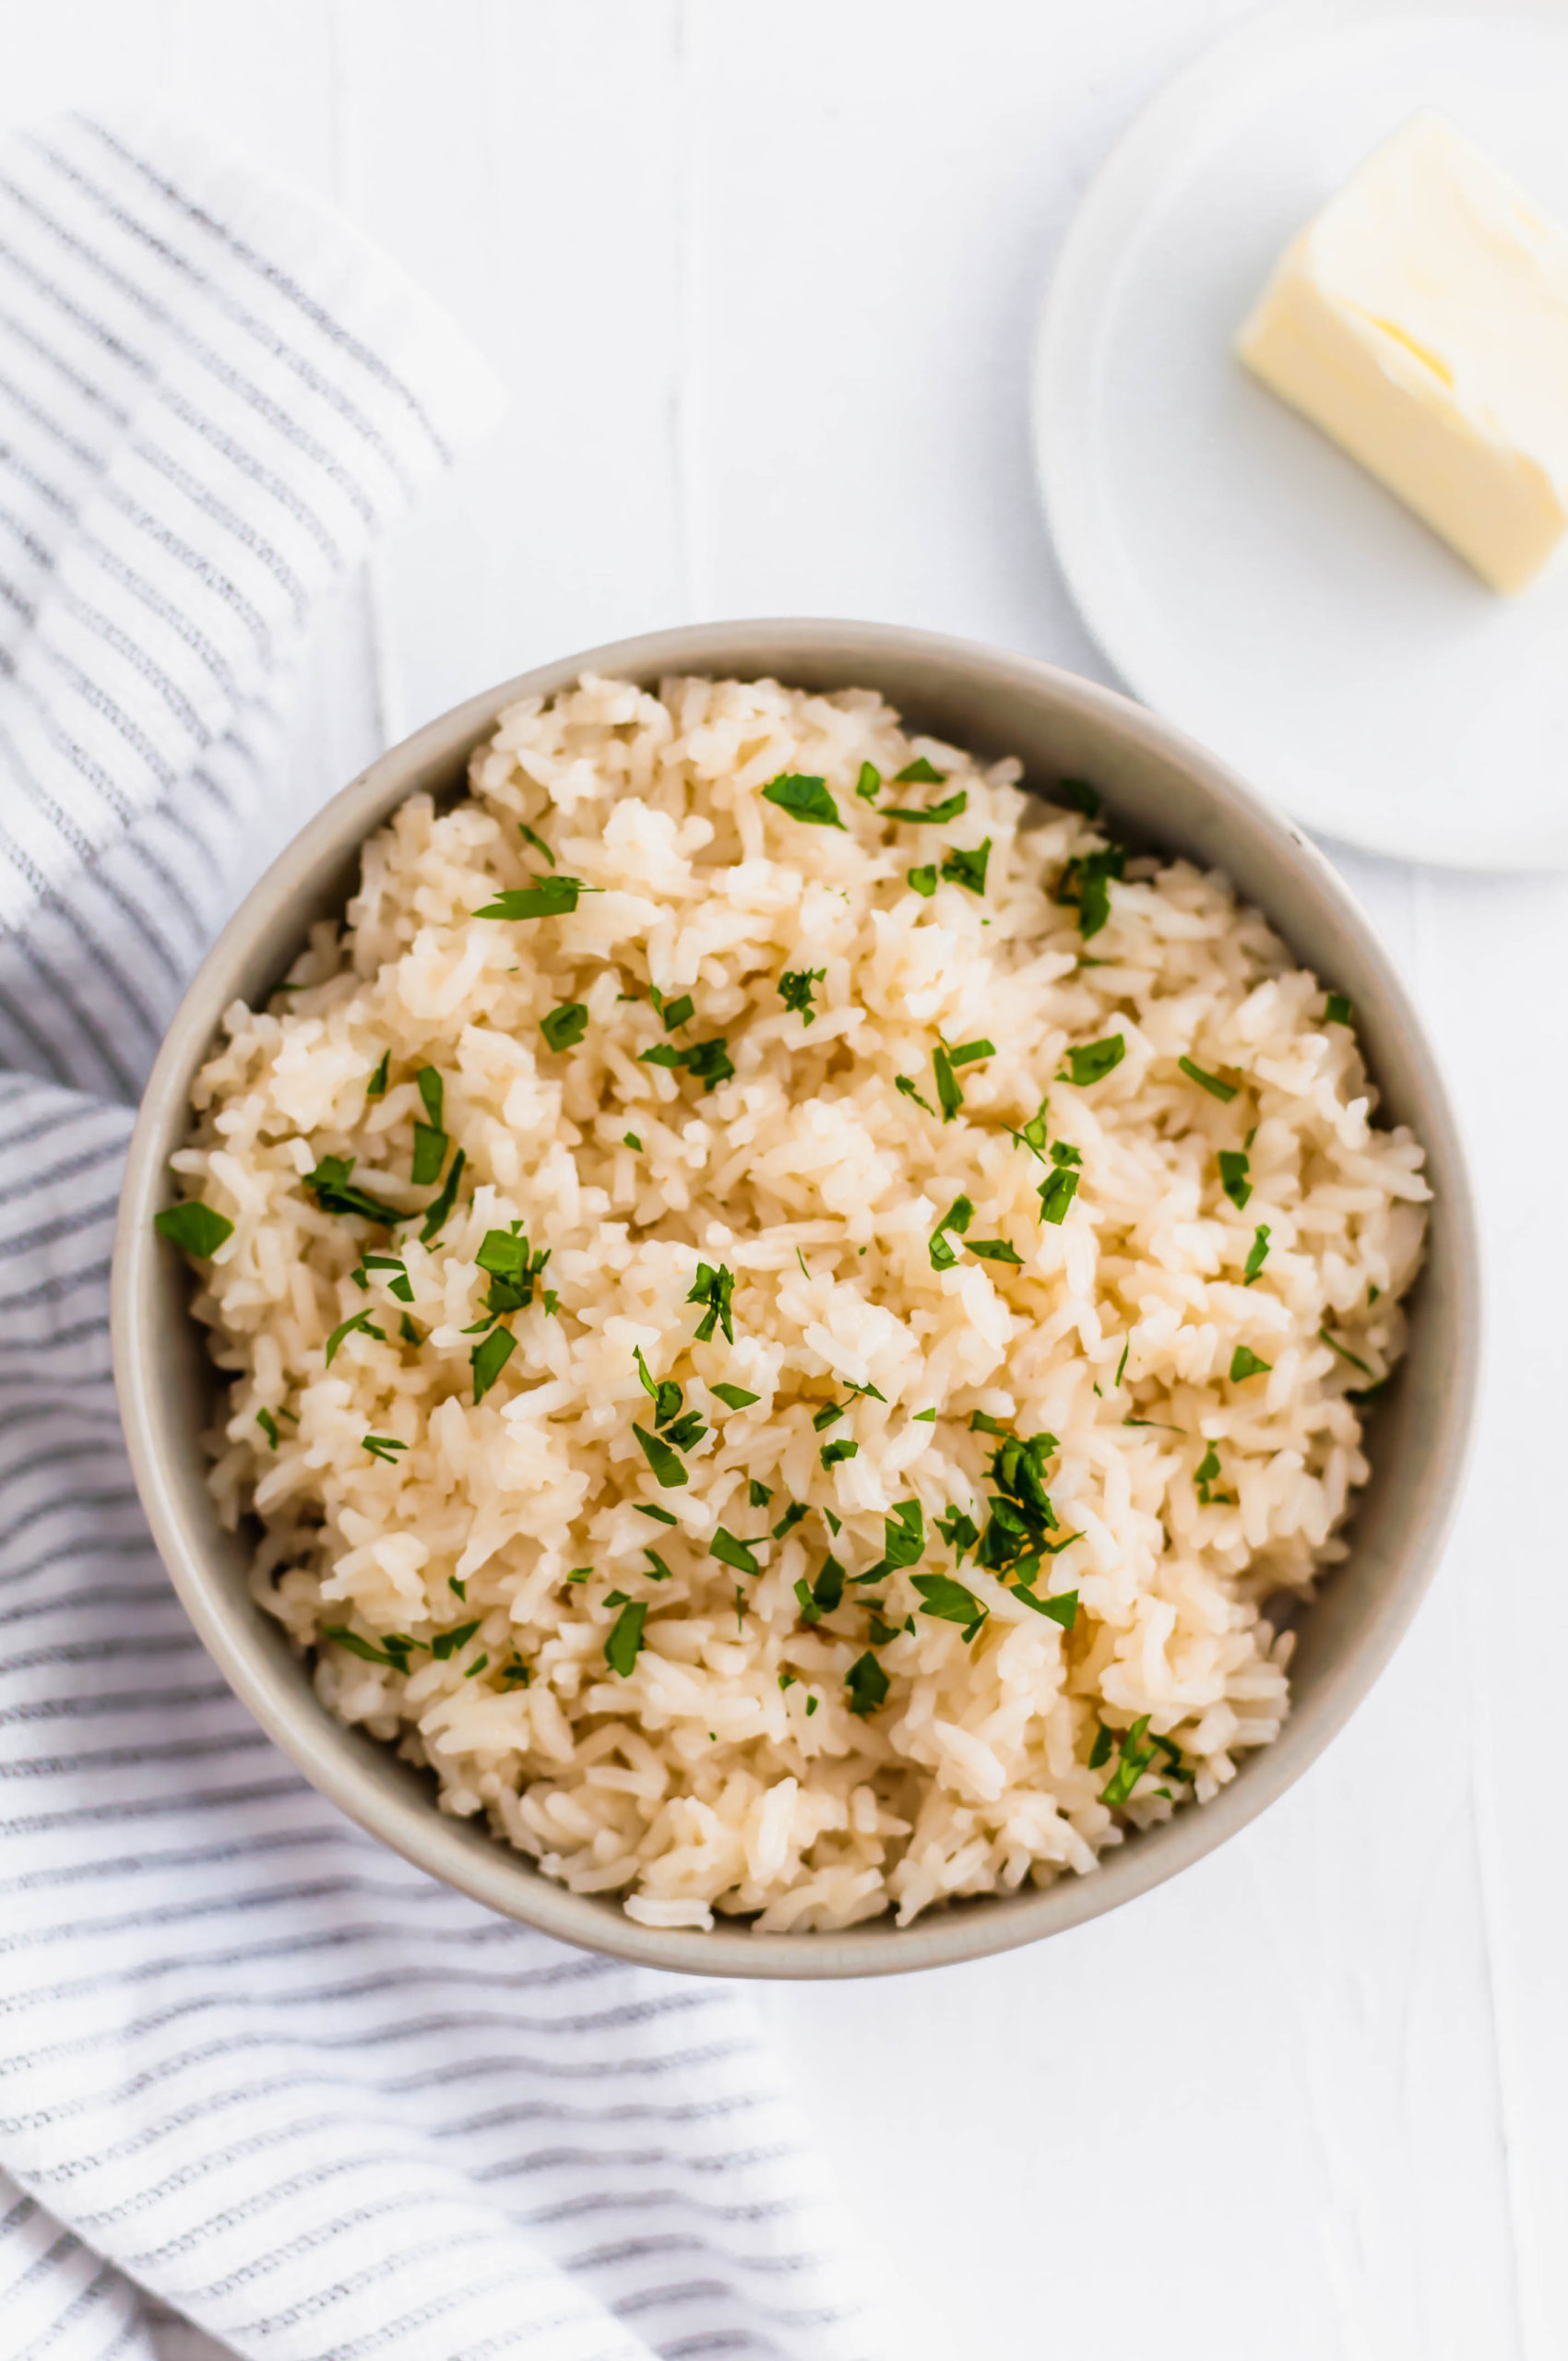 Get ready for the best rice of your life. This Butter Rice is packed with rich, buttery flavor. Chicken stock adds another flavor dimension.